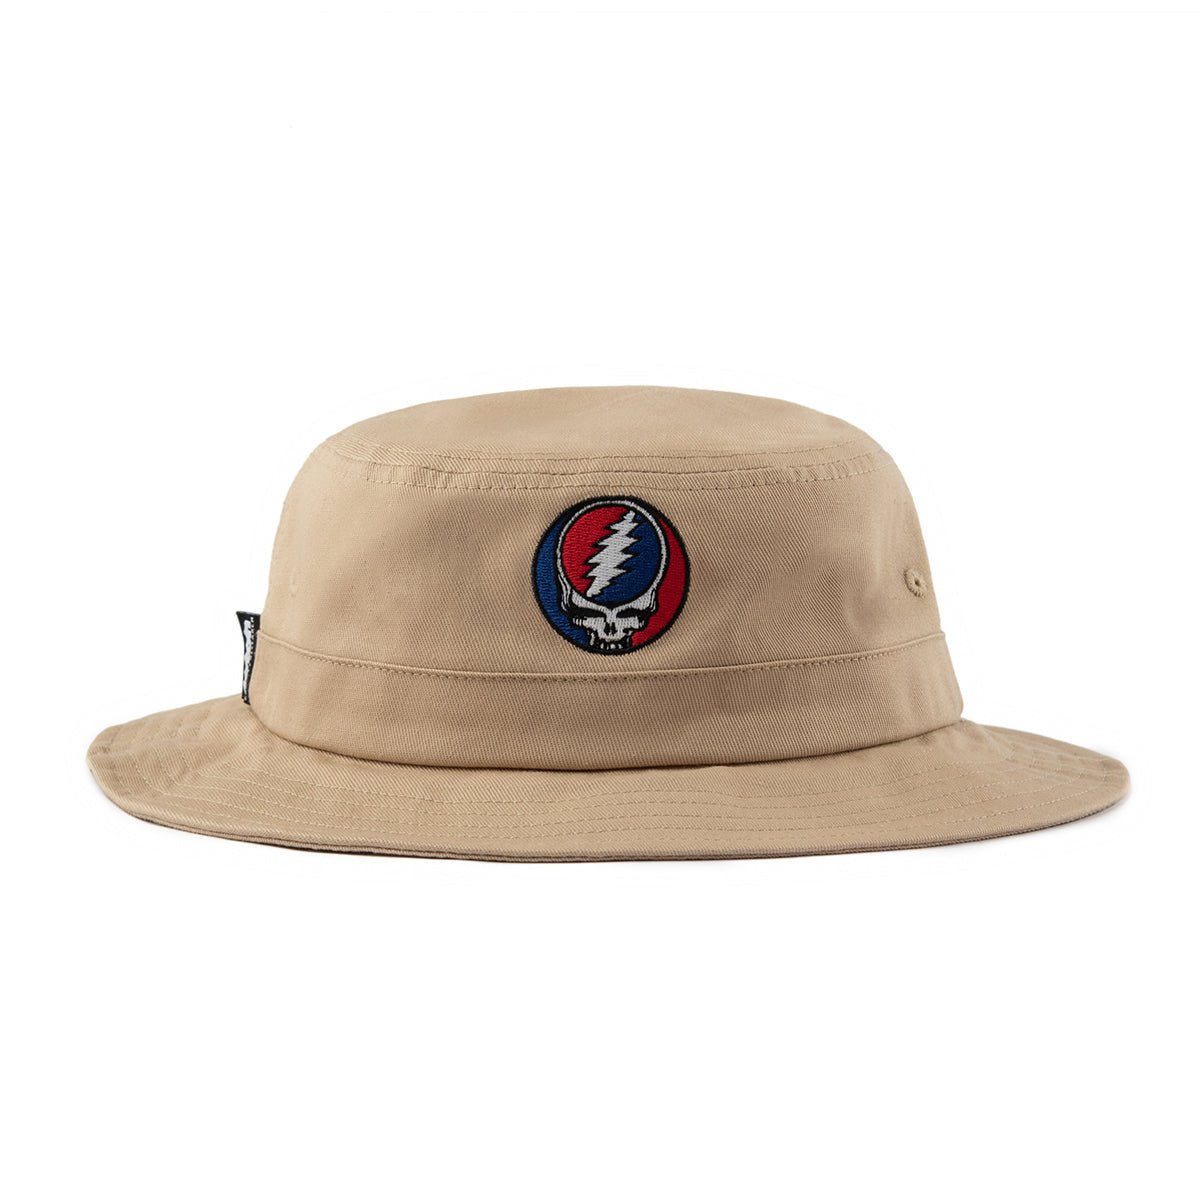 Grateful Dead x TGR Steal Your Face Bucket Hat - Teton Gravity Research